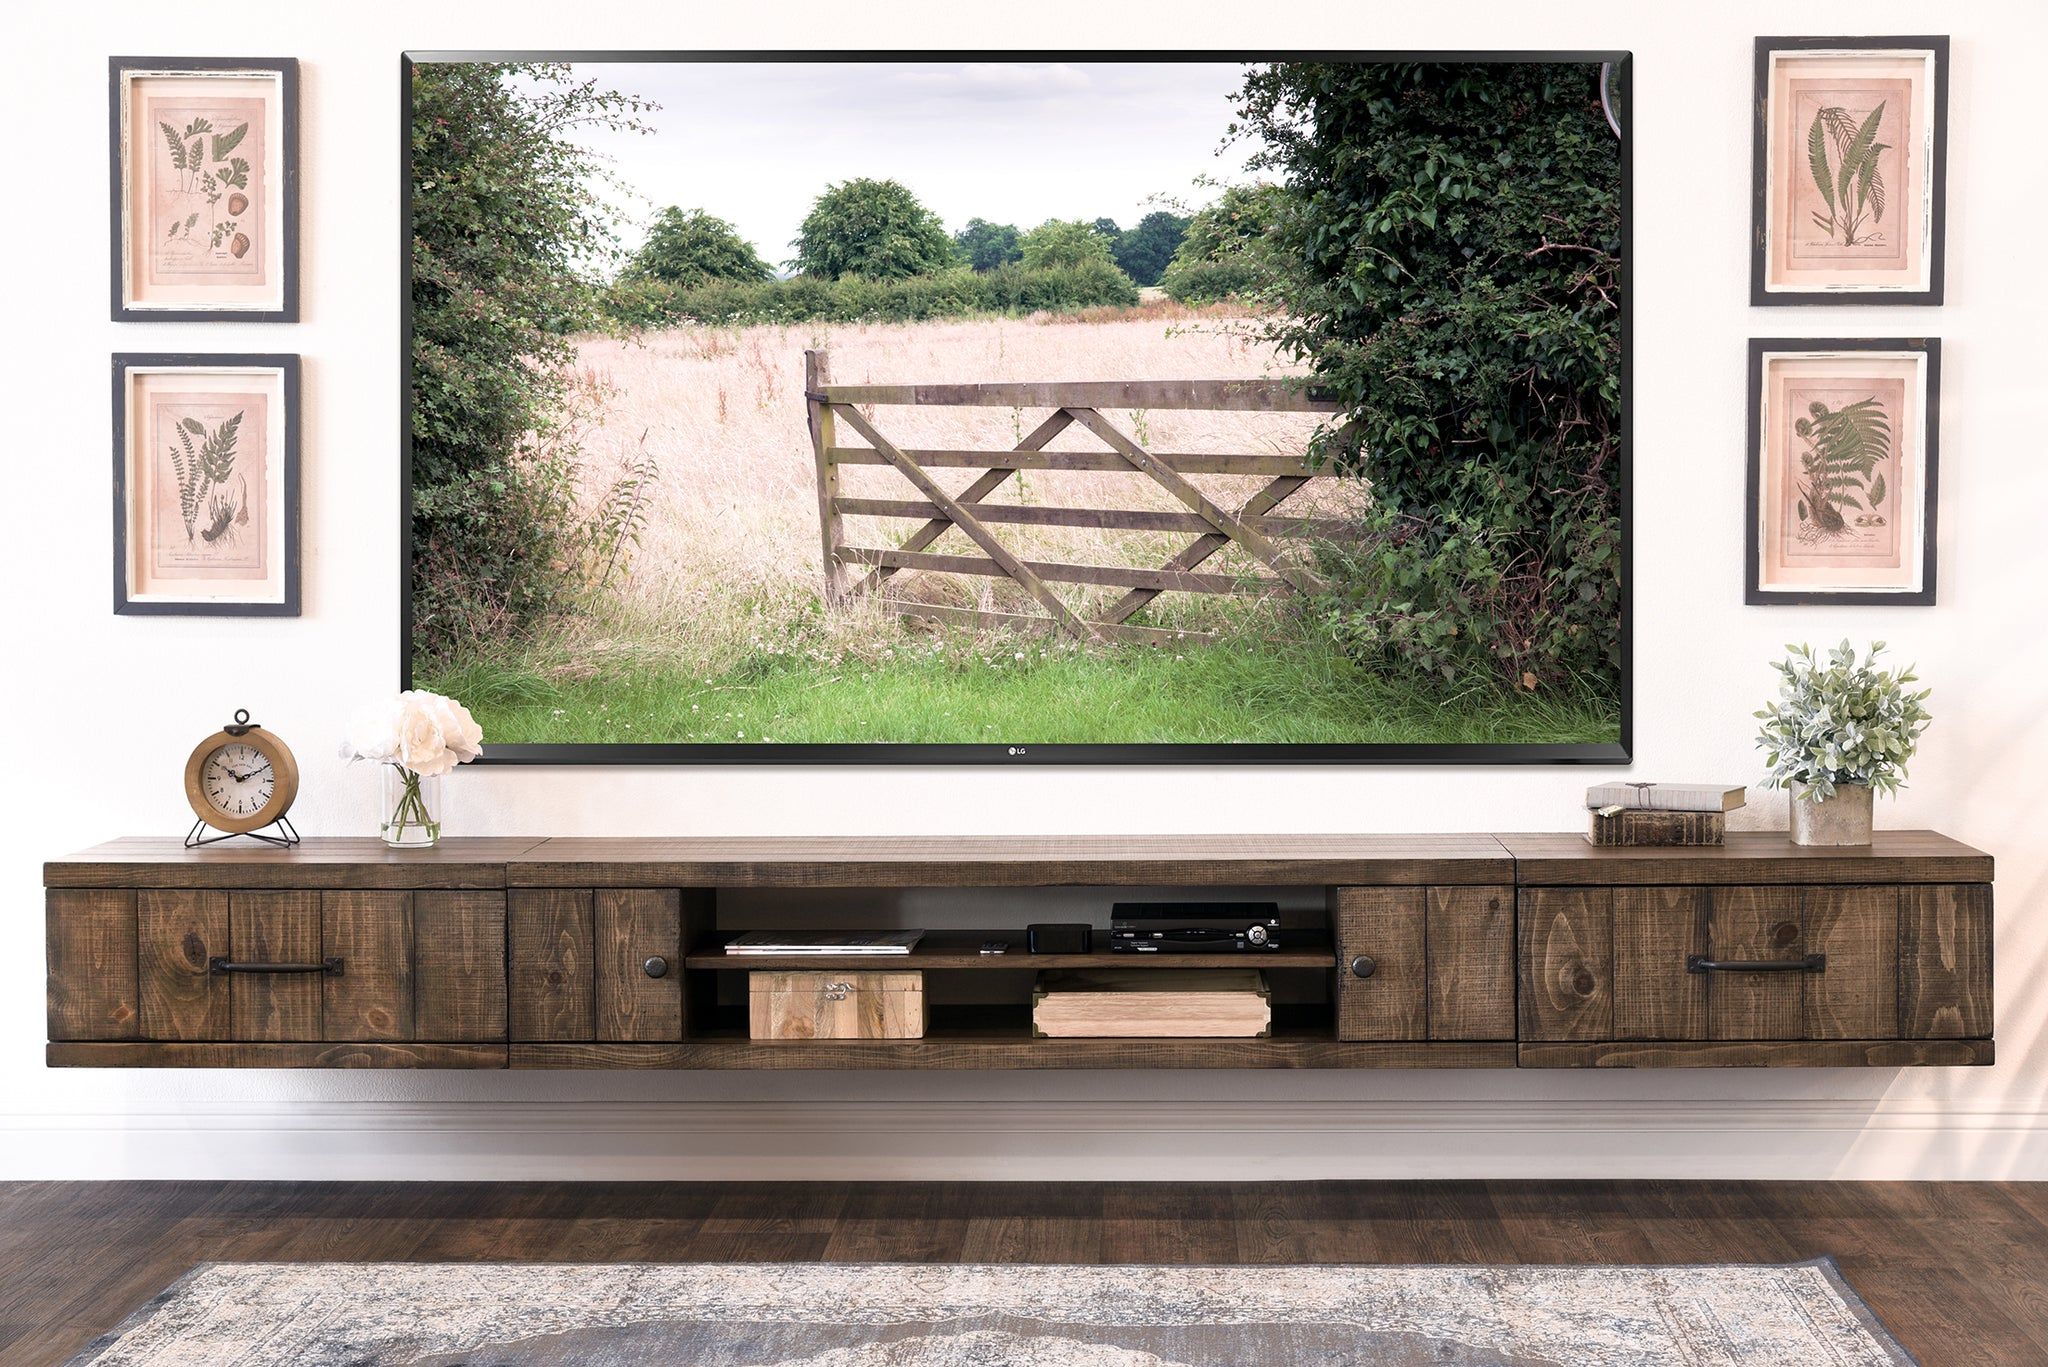 Farmhouse Rustic Wood Floating Tv Stand Entertainment Center – Spice With Regard To Modern Farmhouse Rustic Tv Stands (Gallery 4 of 20)